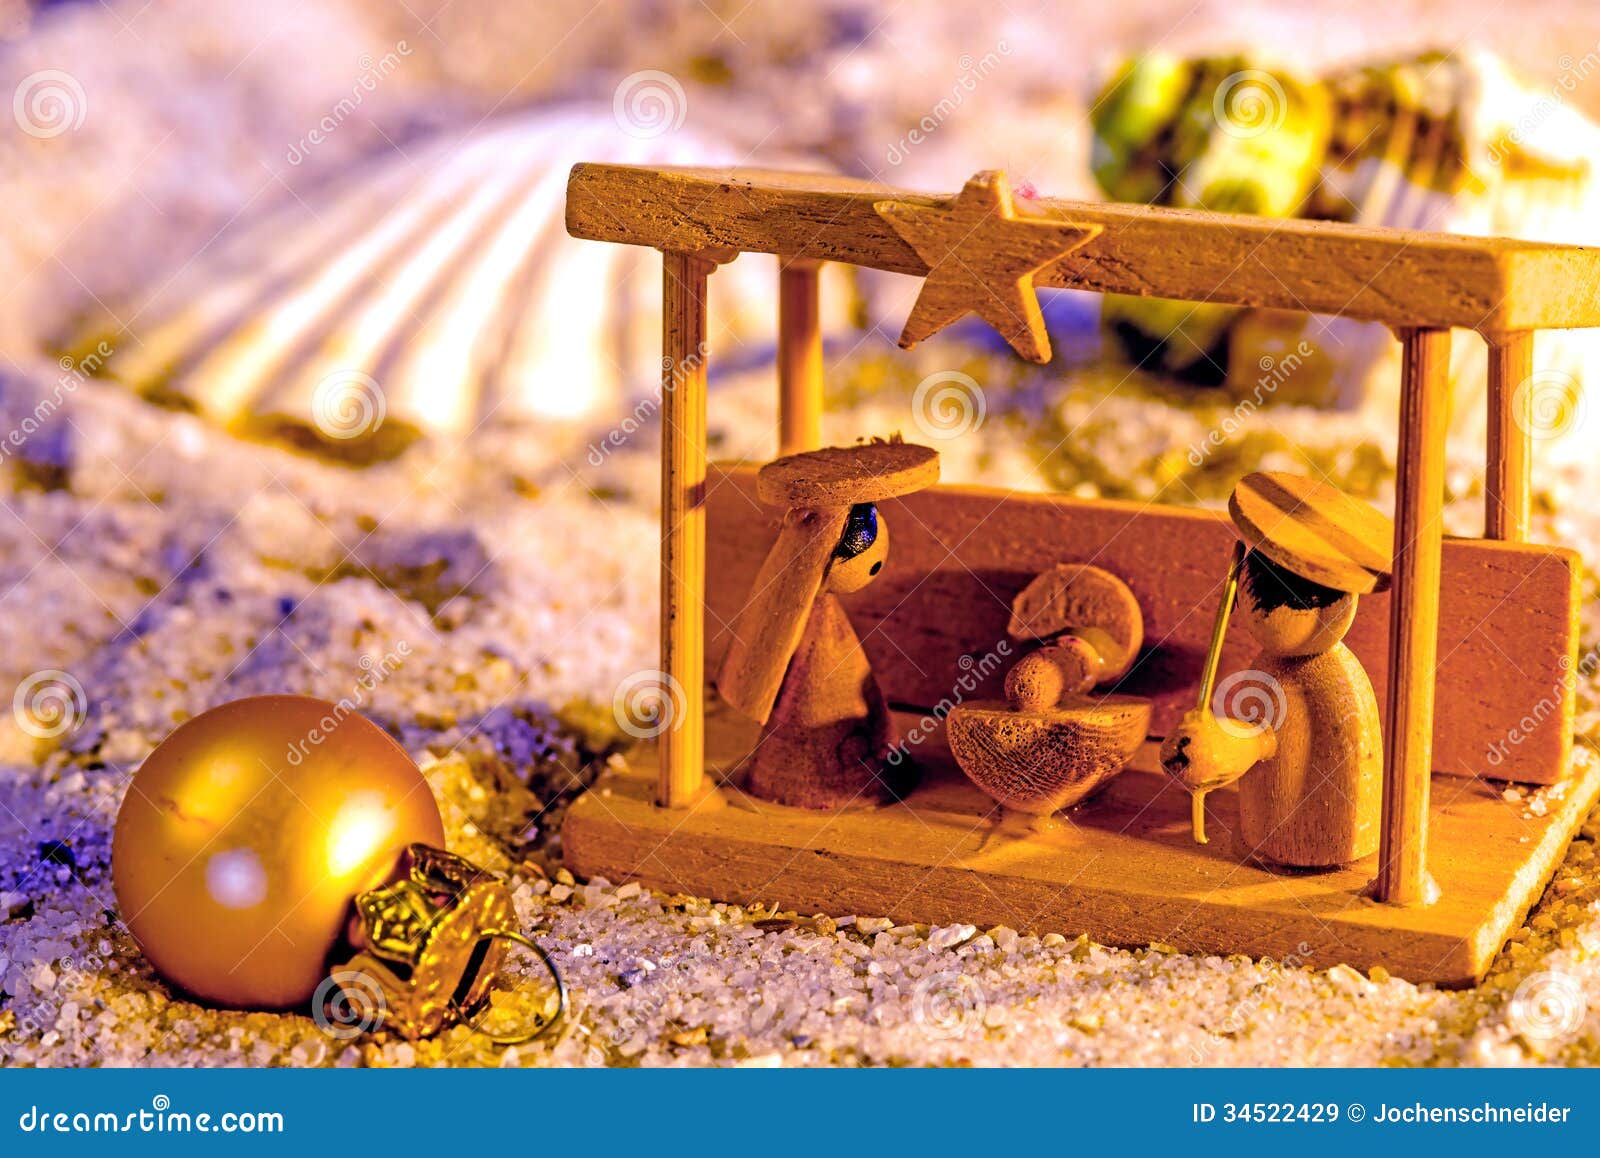 Nativity Scene On A Beach Royalty Free Stock Images - Image: 34522429